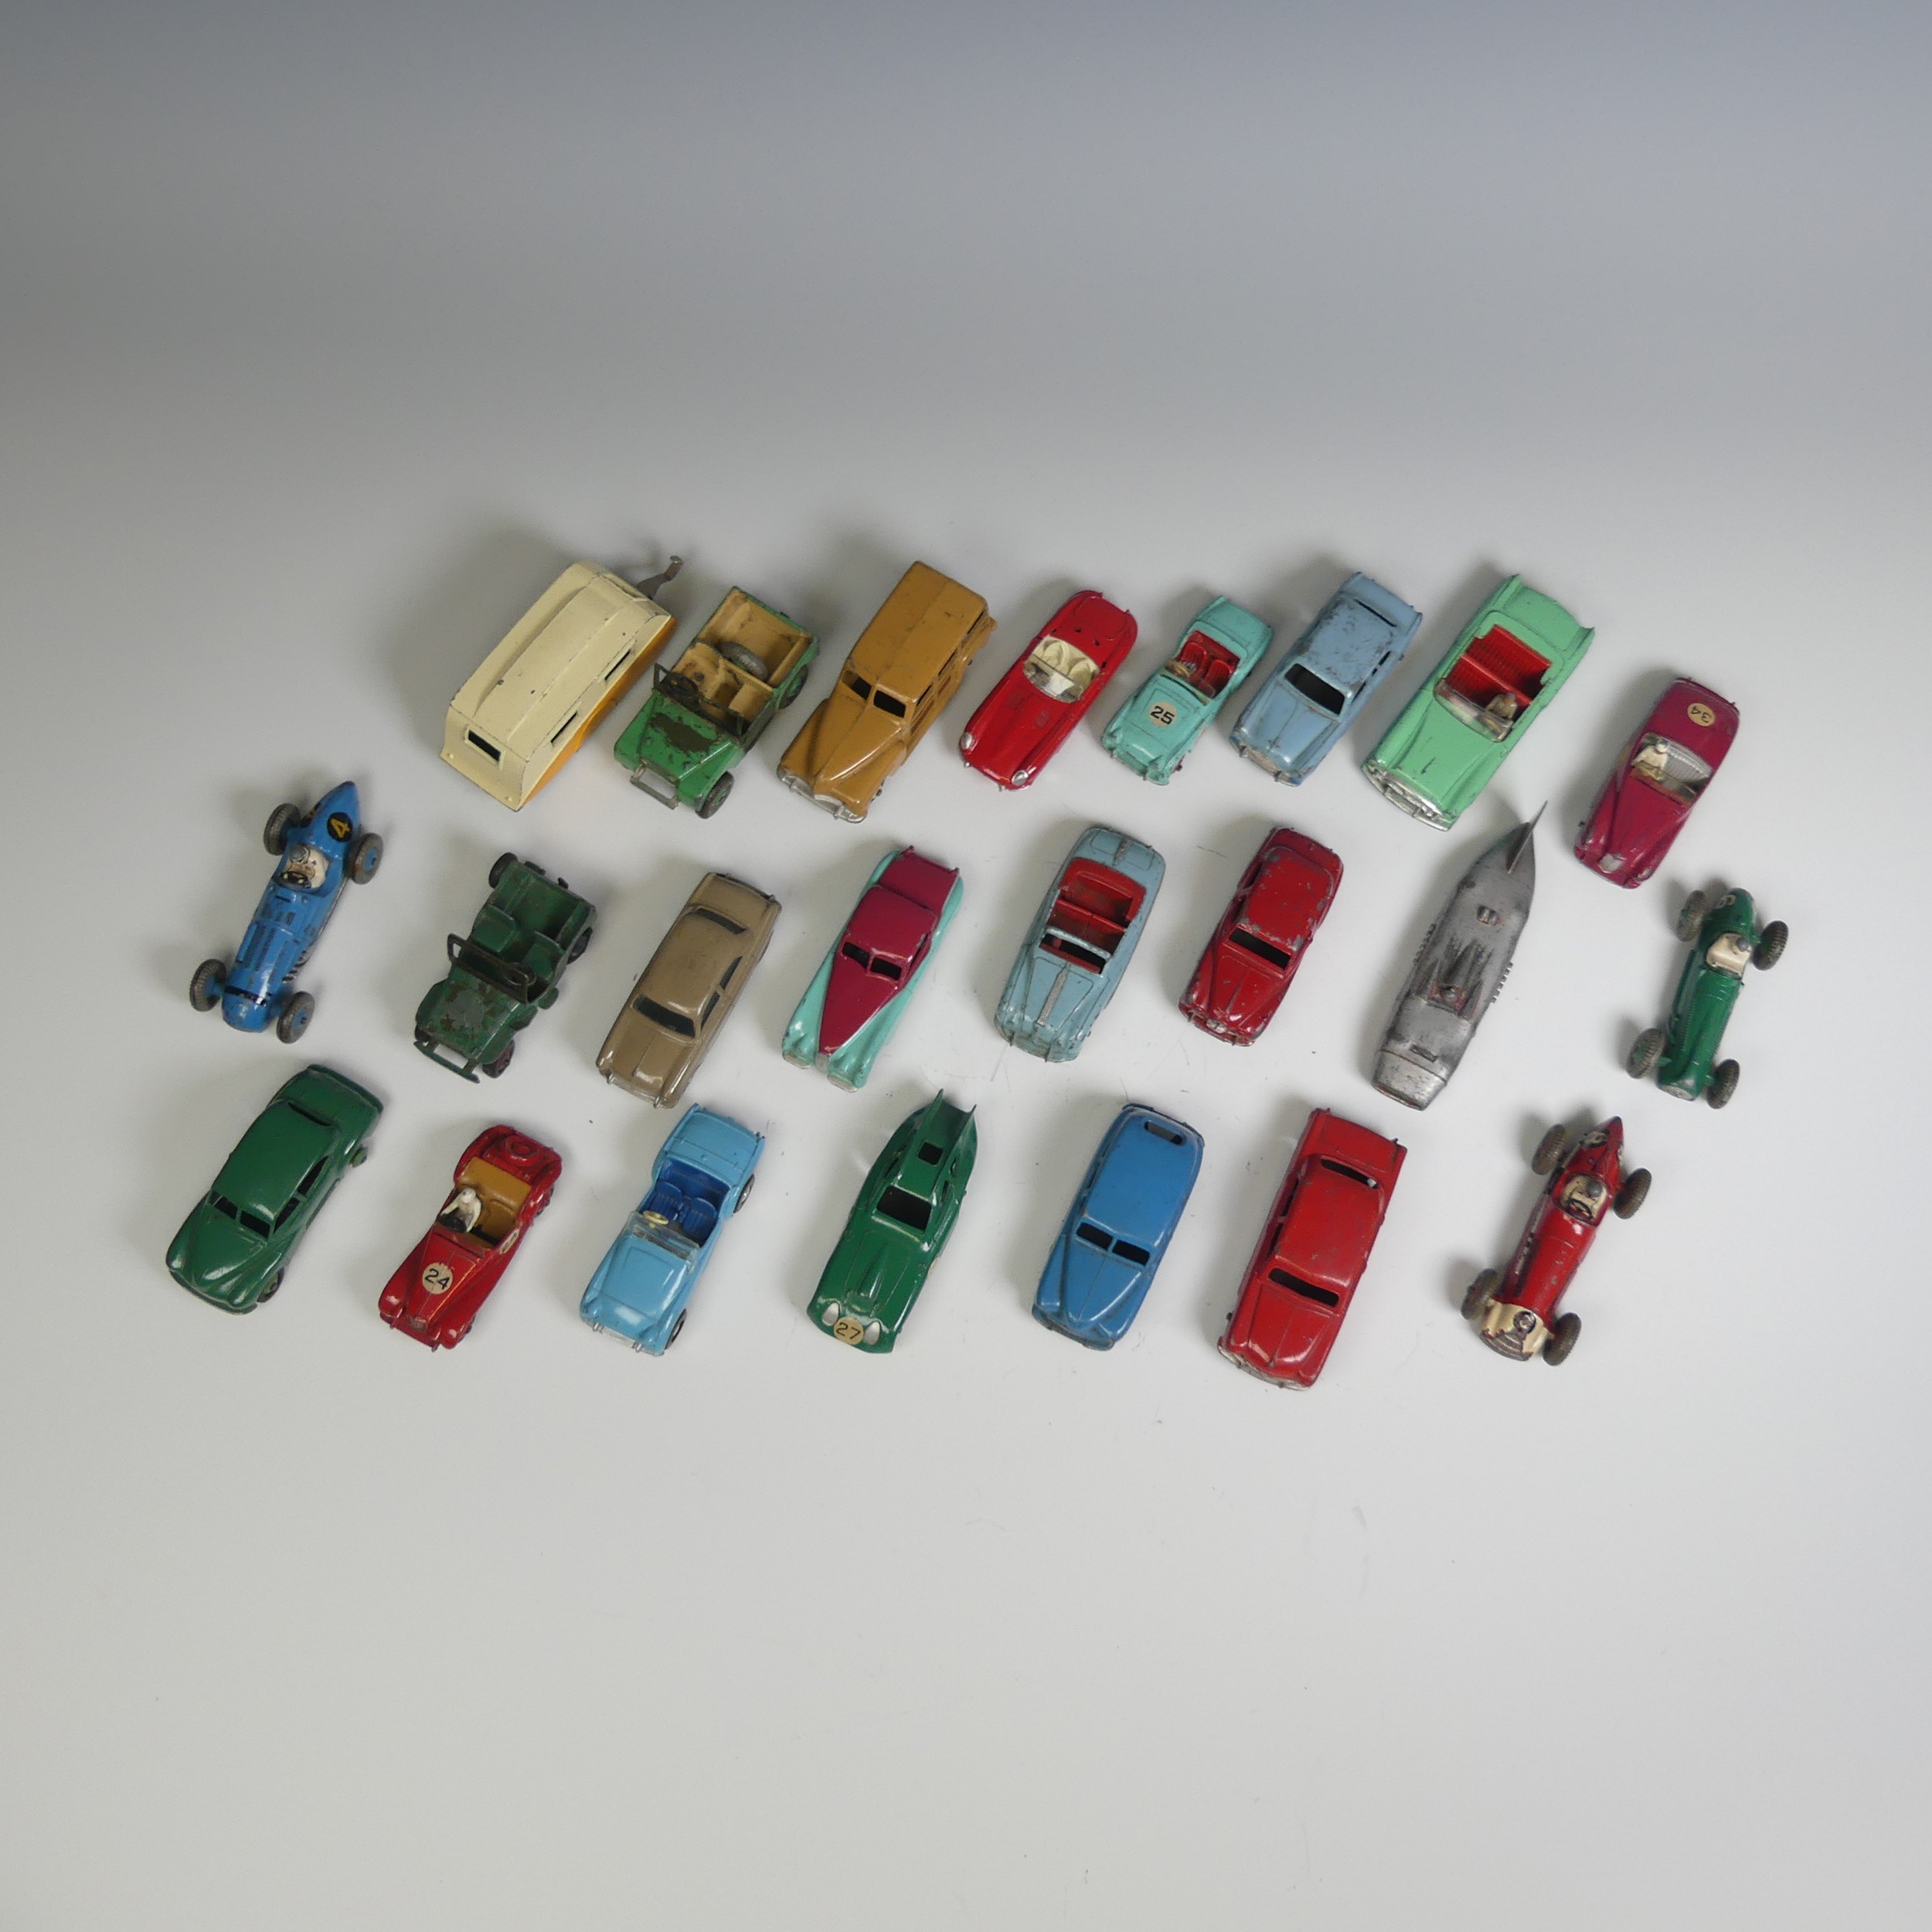 Dinky Toys; twenty-one model vehicles, unboxed, including 23f Alfa Romeo racing car, 23g Cooper- - Image 2 of 3